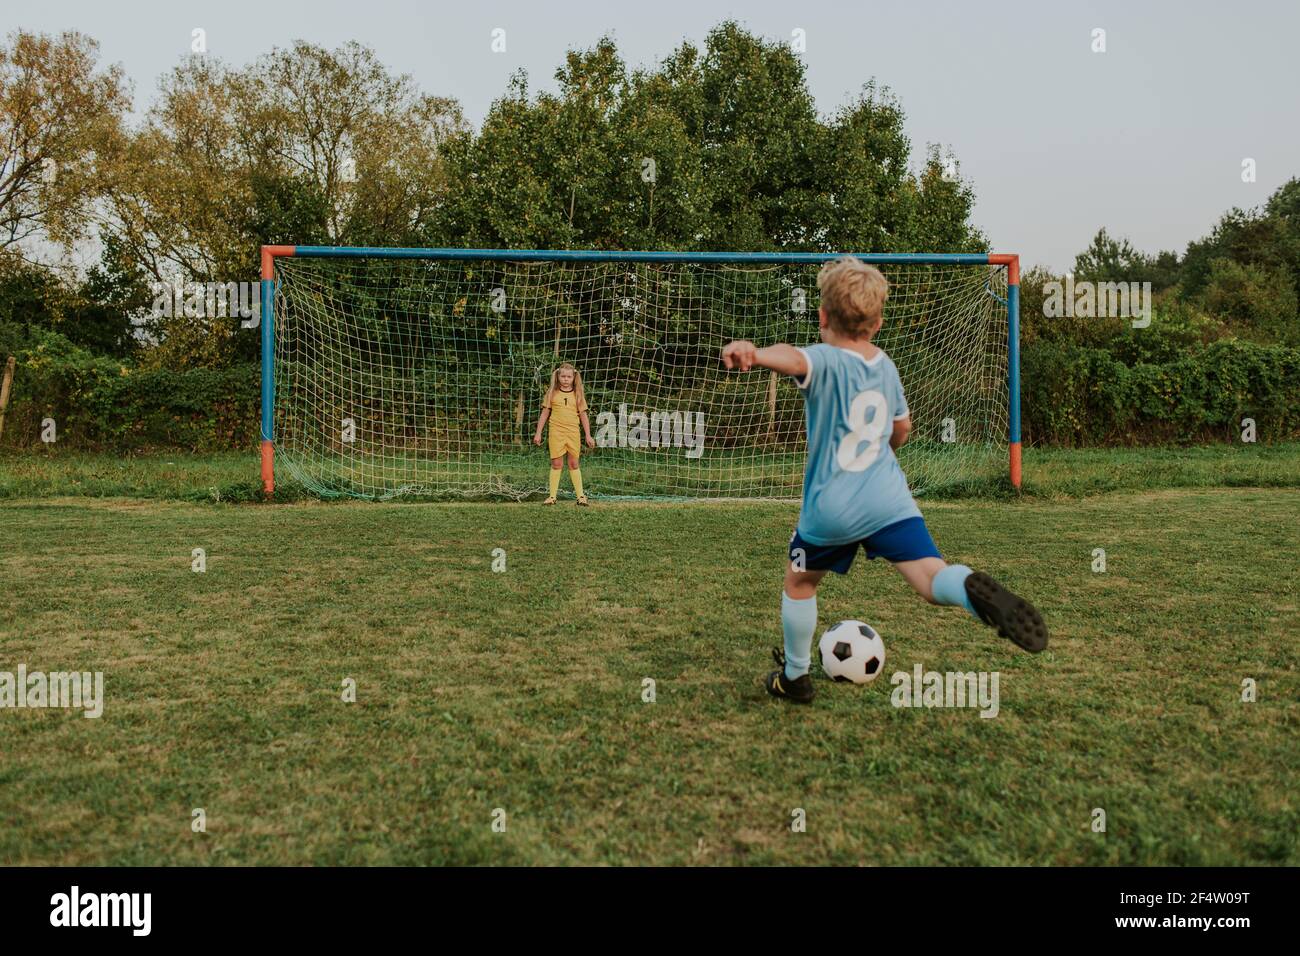 Back view of a child wearing football dress shooting ball in front of goal. Full length of girl goalkeeper standing at goal and soccer player kicking Stock Photo